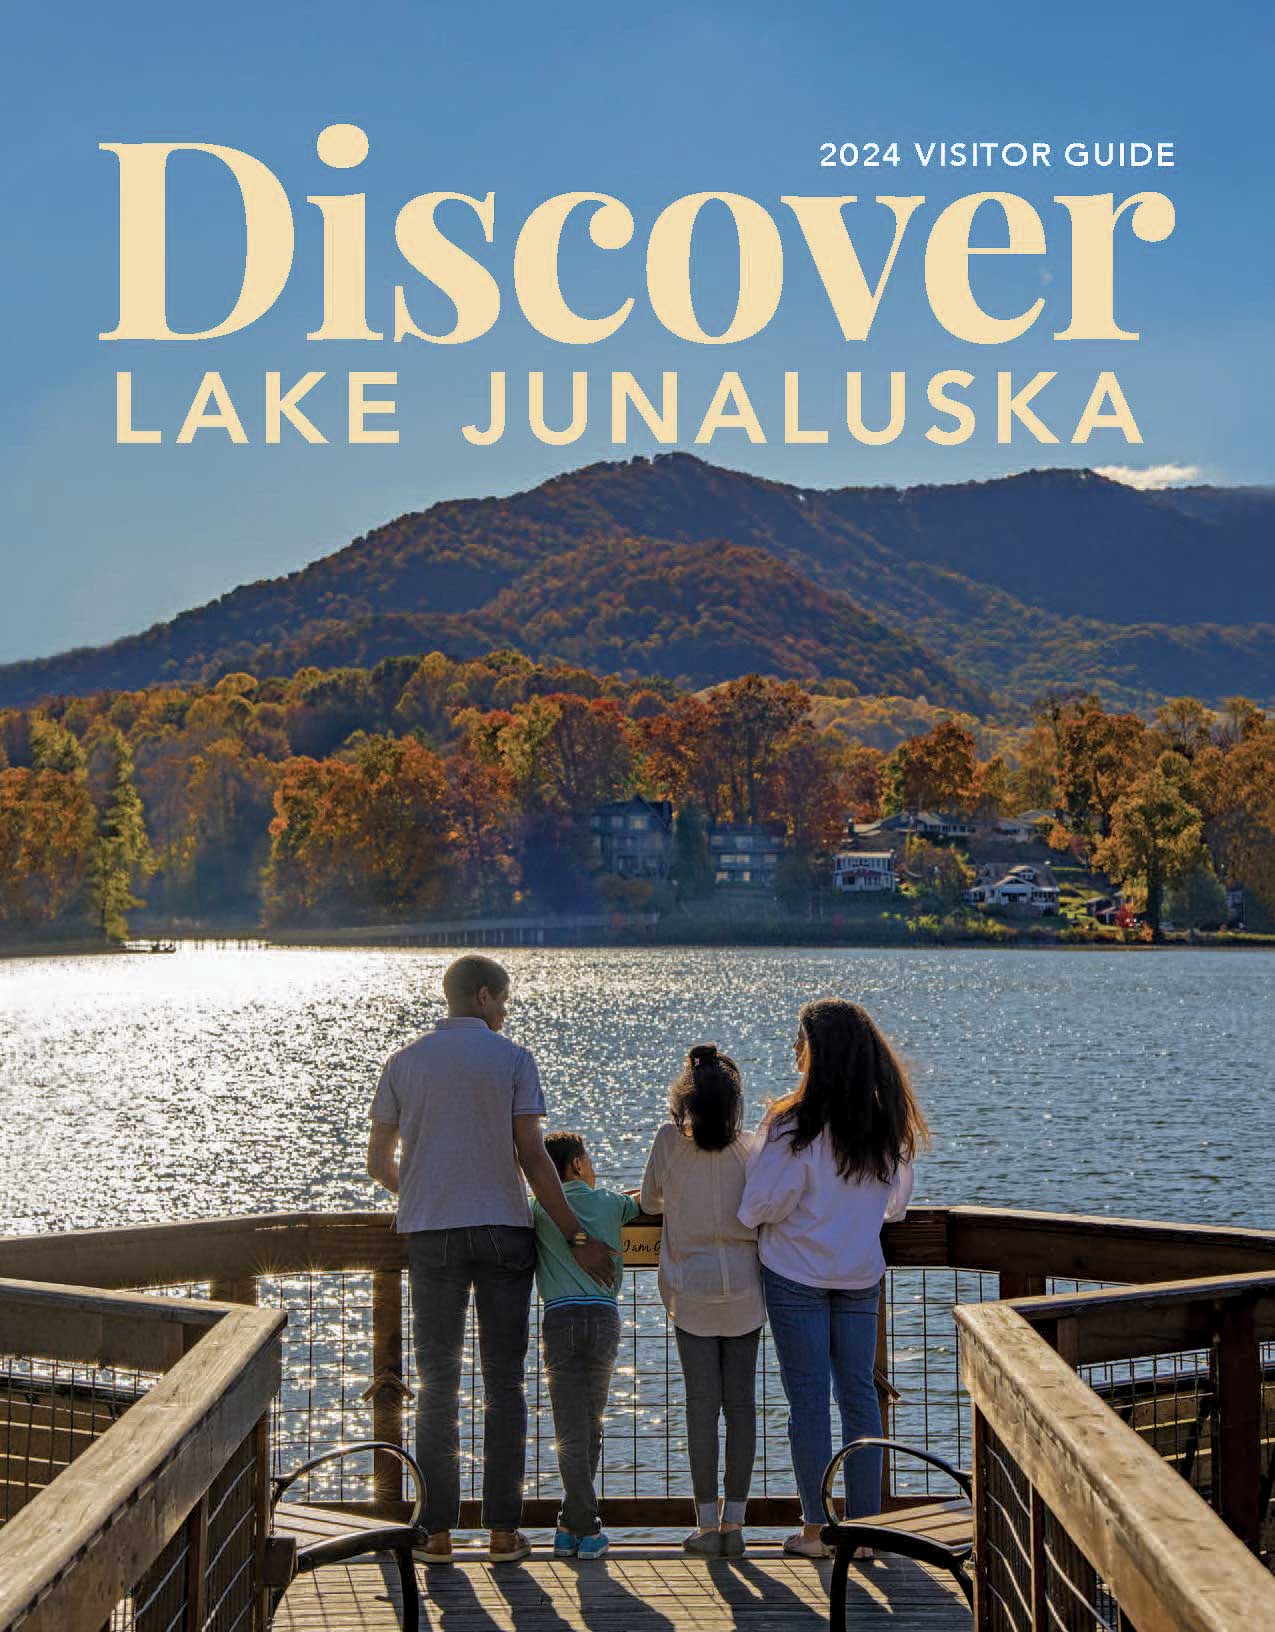 The cover photo of Discover Lake Junaluska shows a family spending time together on the meditation pier looking out at the lake.